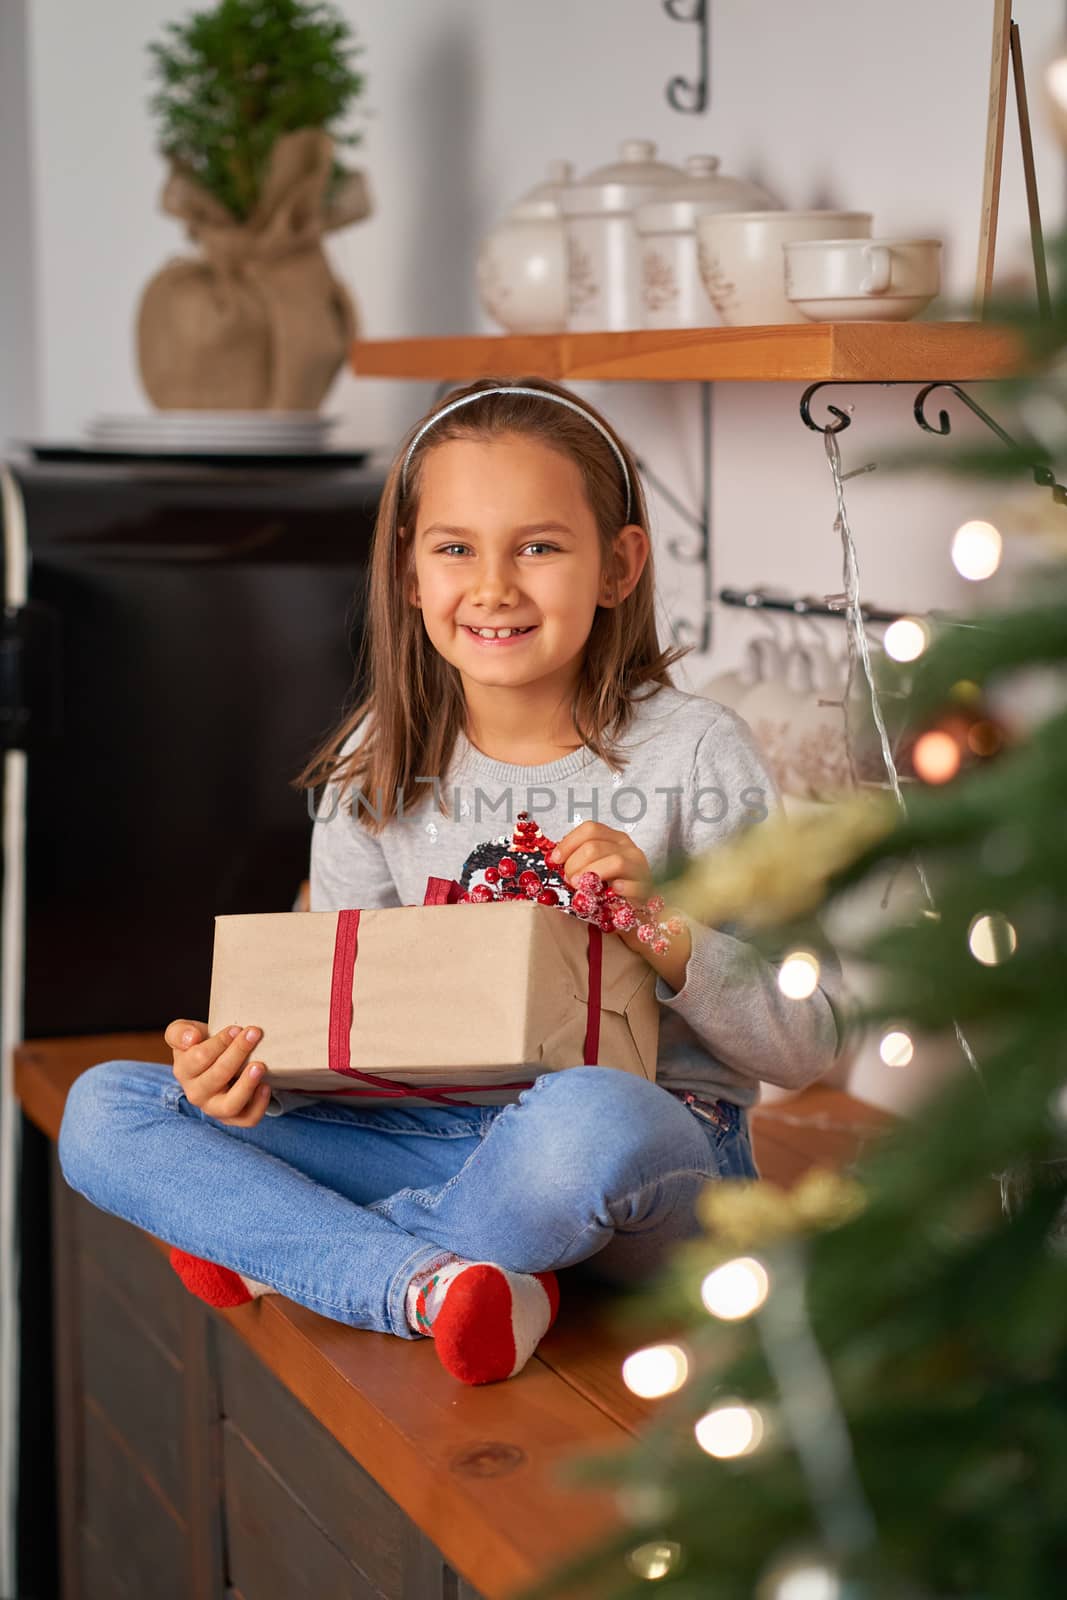 Little girl opens a box with a Christmas present from Santa.